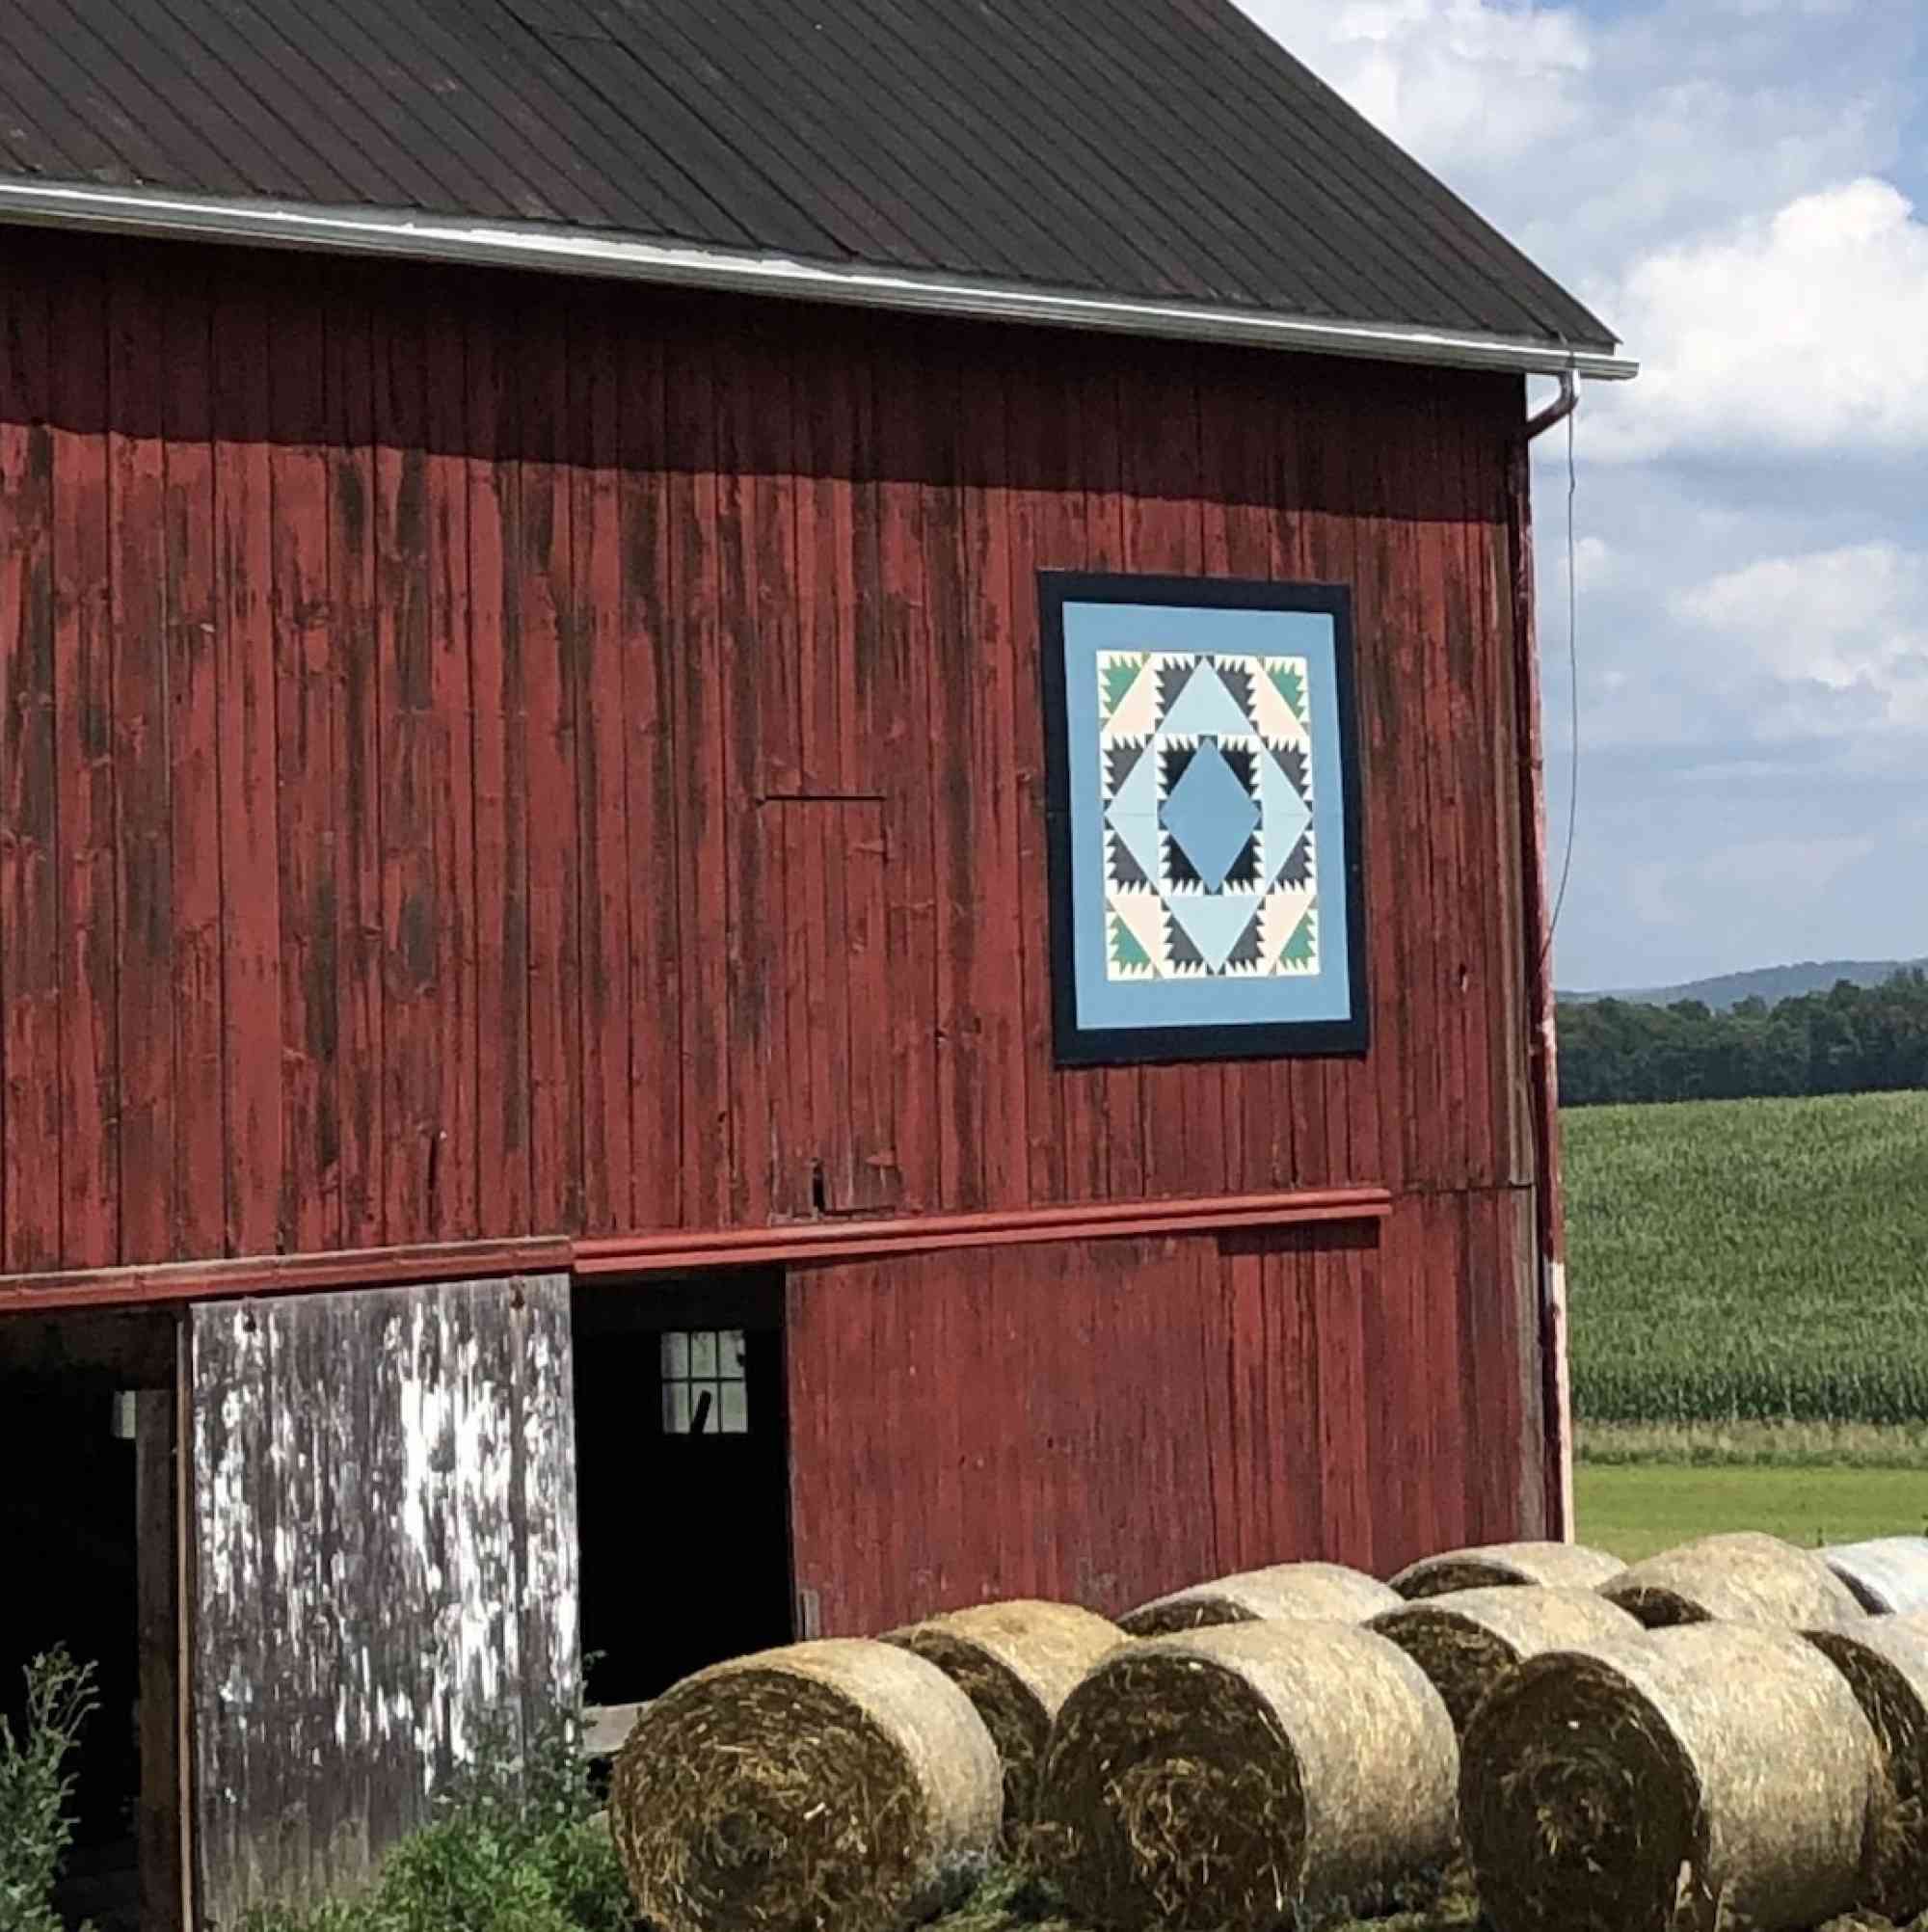 Rhoneymeade red barn hay quilt square